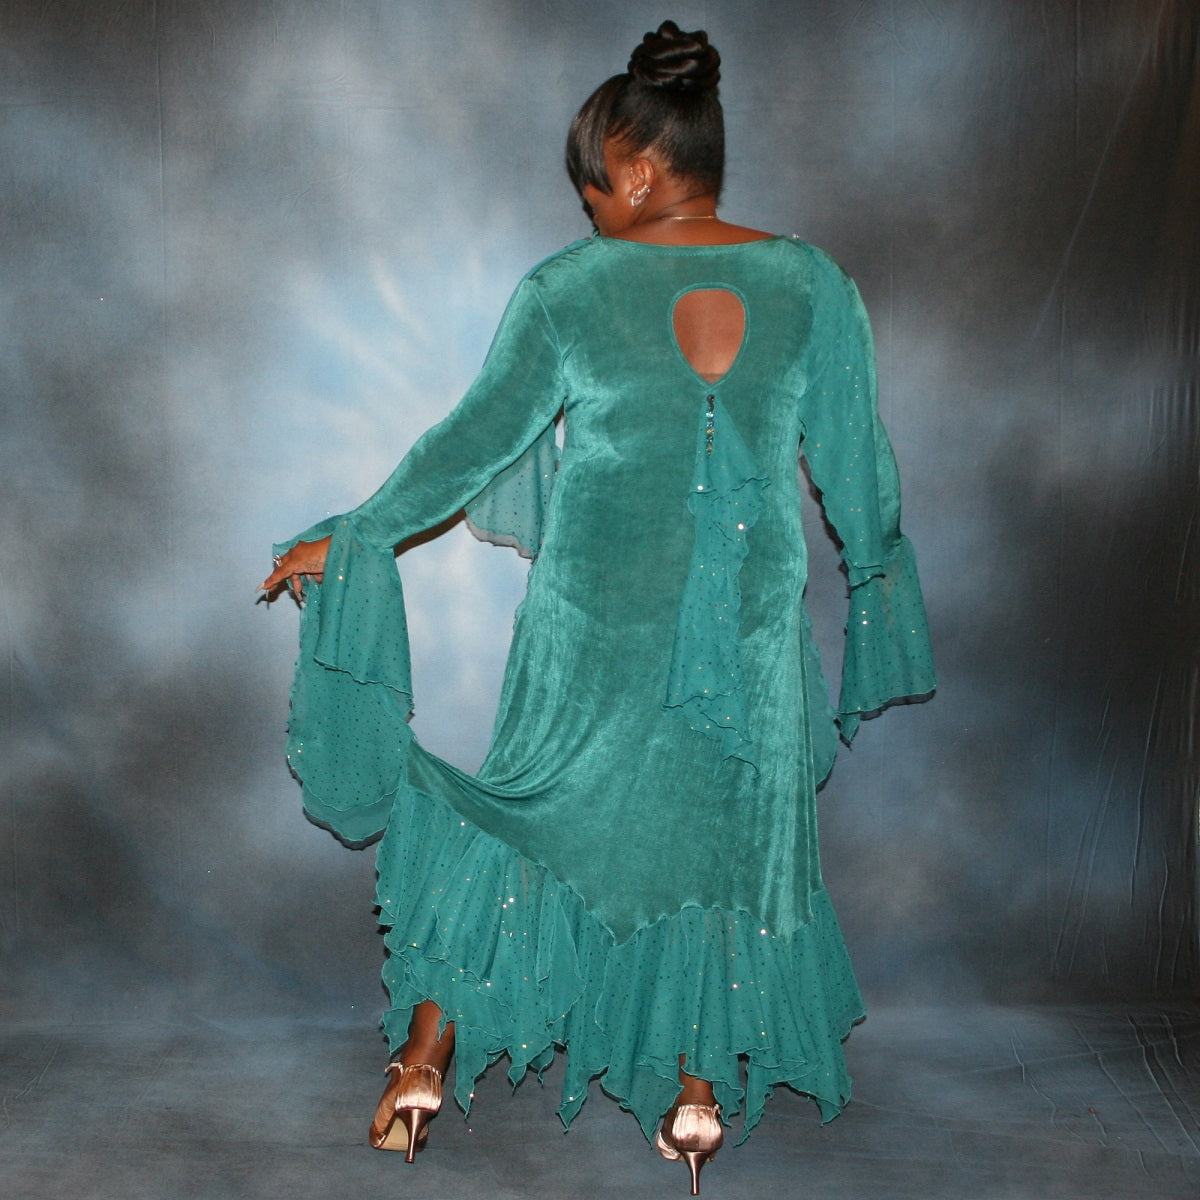 back view of Teal plus size ballroom dance dress was created in luxurious teal solid slinky with oodles of champagne sequined chiffon flounces & floats, embellished with a lovely touch of Swarovski hand beading.